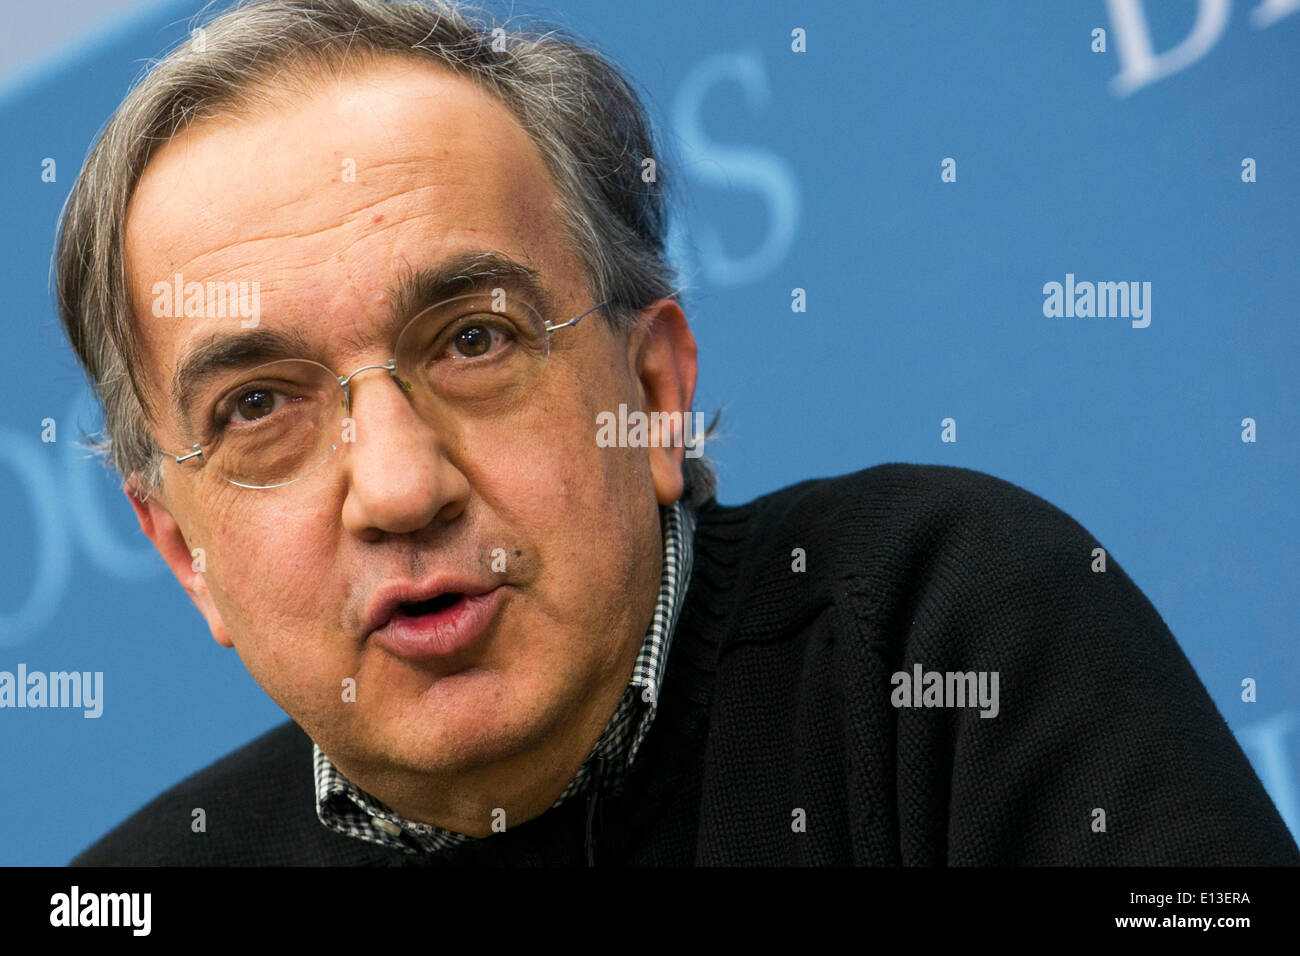 Washington DC, USA. 21st May 2014. Sergio Marchionne, CEO of Fiat S.p.A and the Chrysler Group, participates in a discussion on the auto industry at the Brookings Institution in Washington, D.C. on May 21, 2014. Credit:  Kristoffer Tripplaar/Alamy Live News Stock Photo